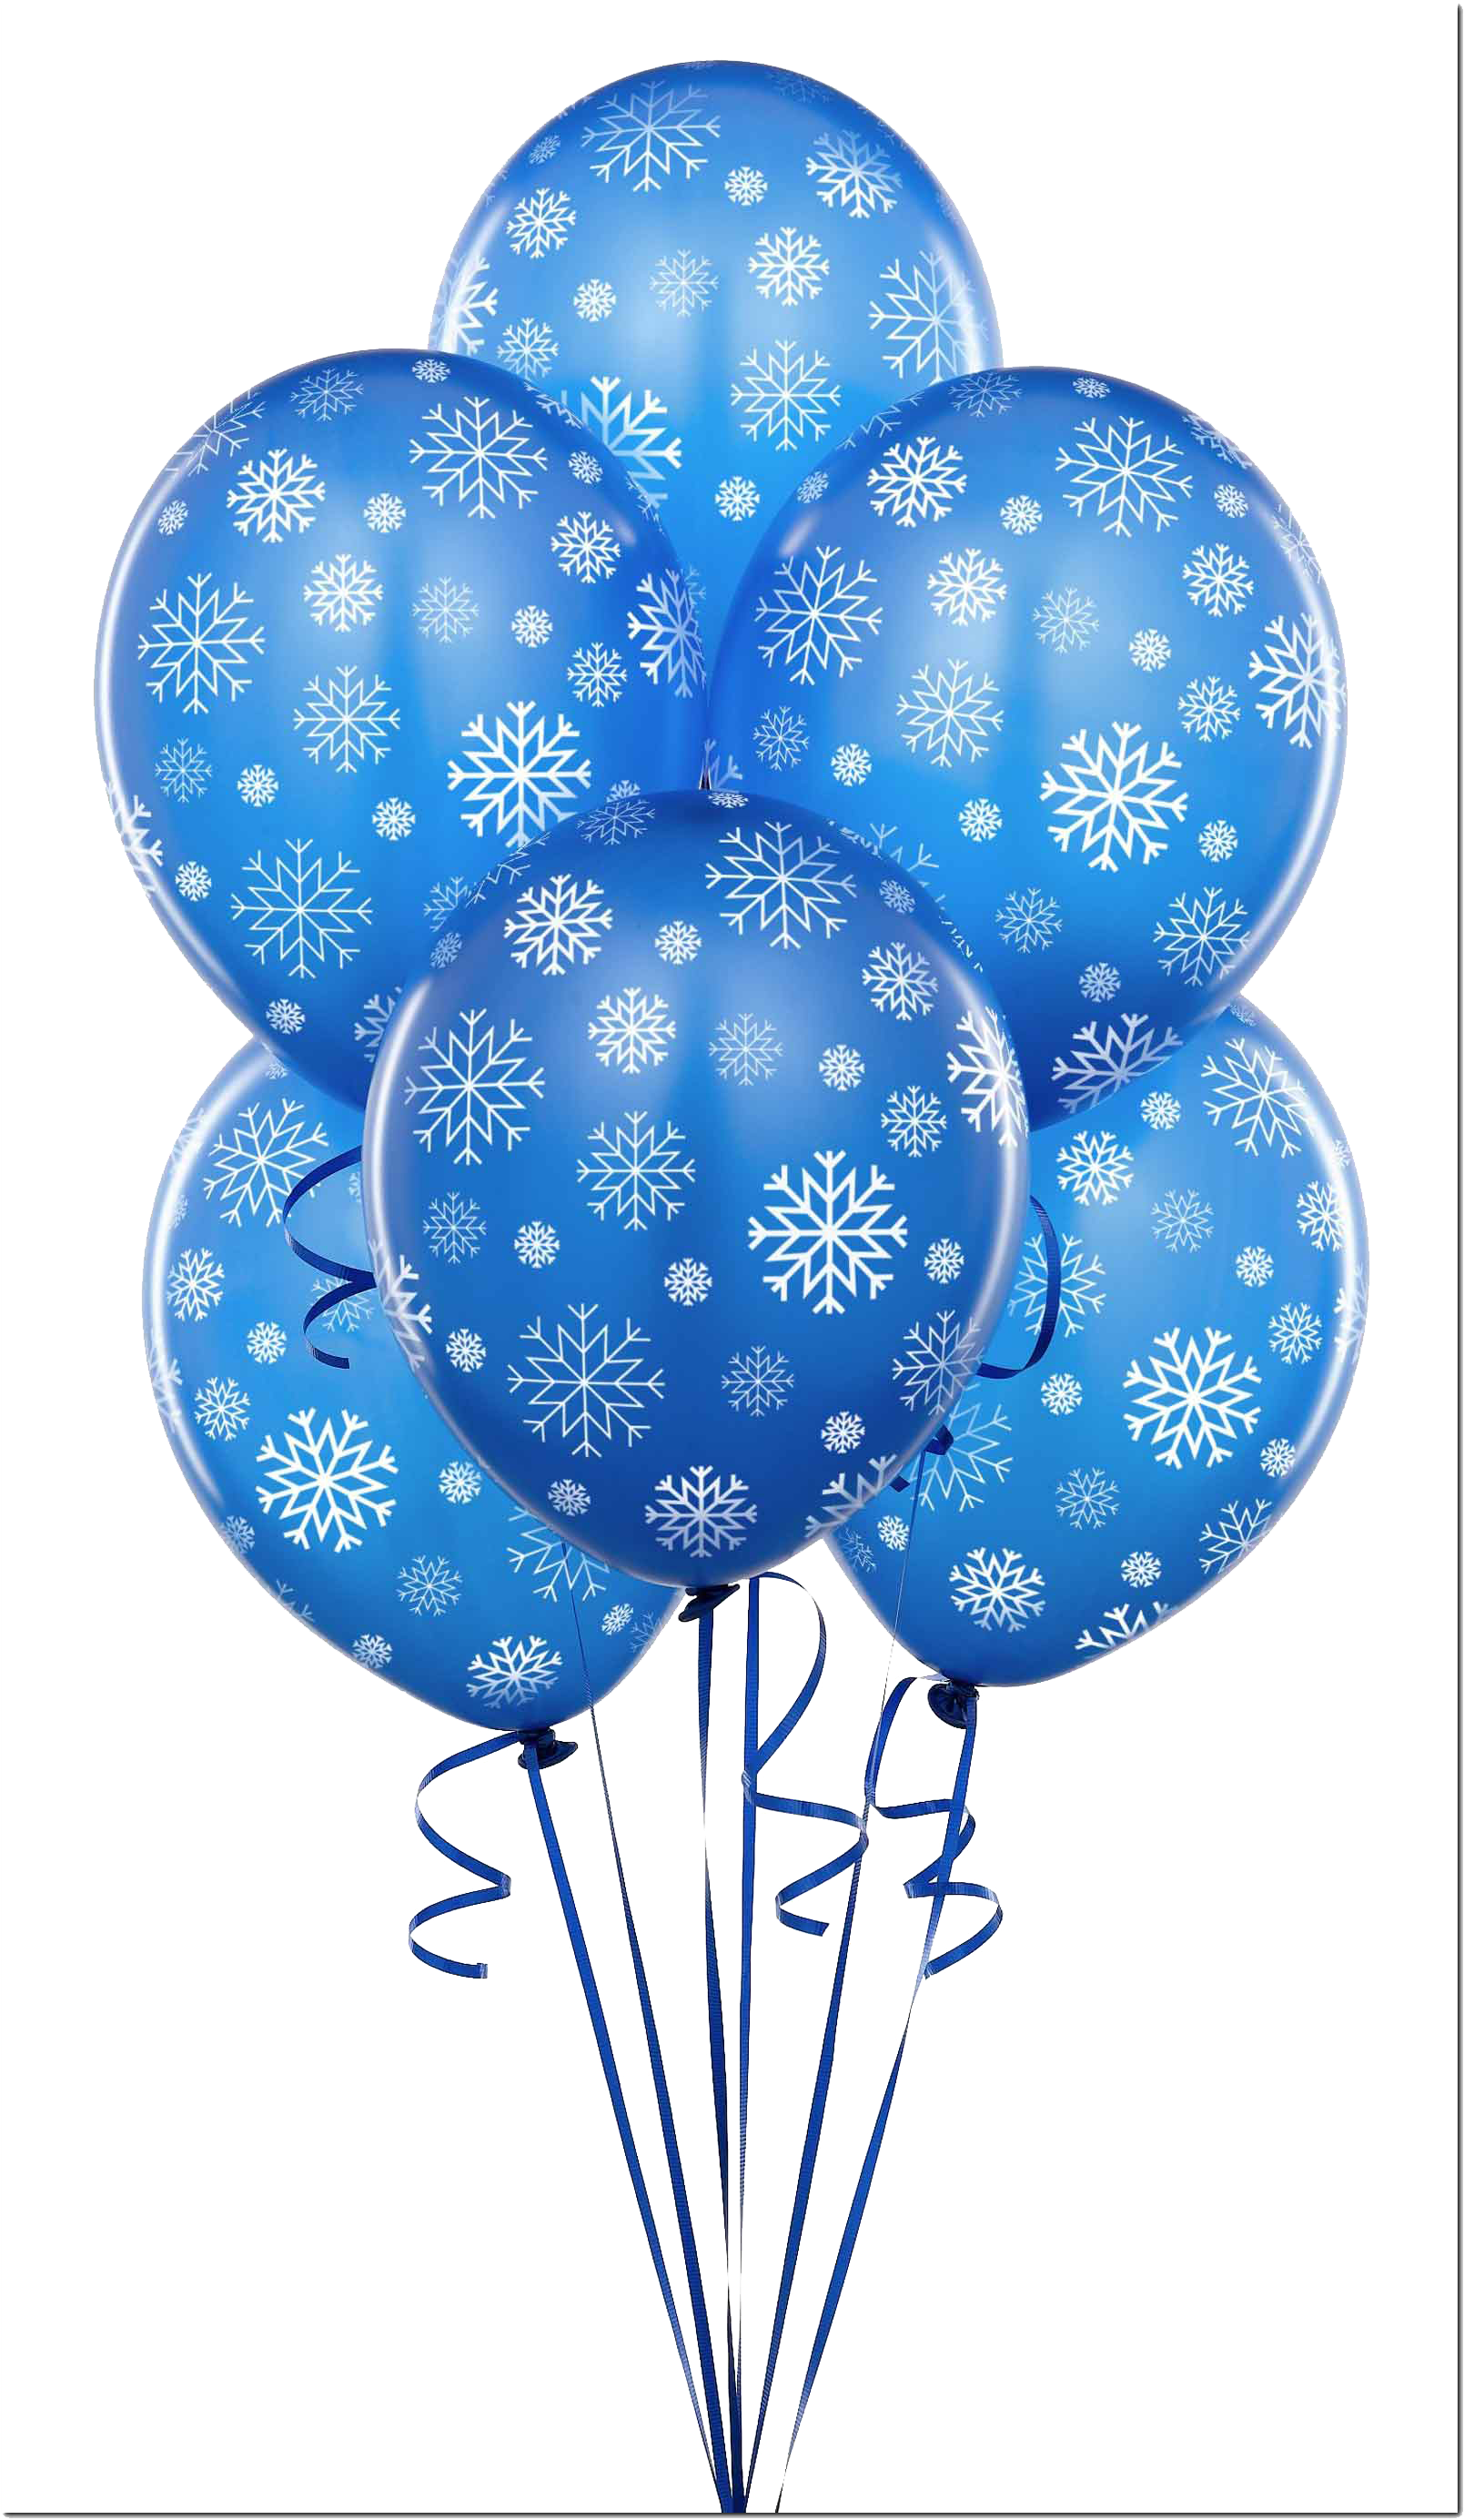 A Bunch Of Blue Balloons With White Snowflakes On Them